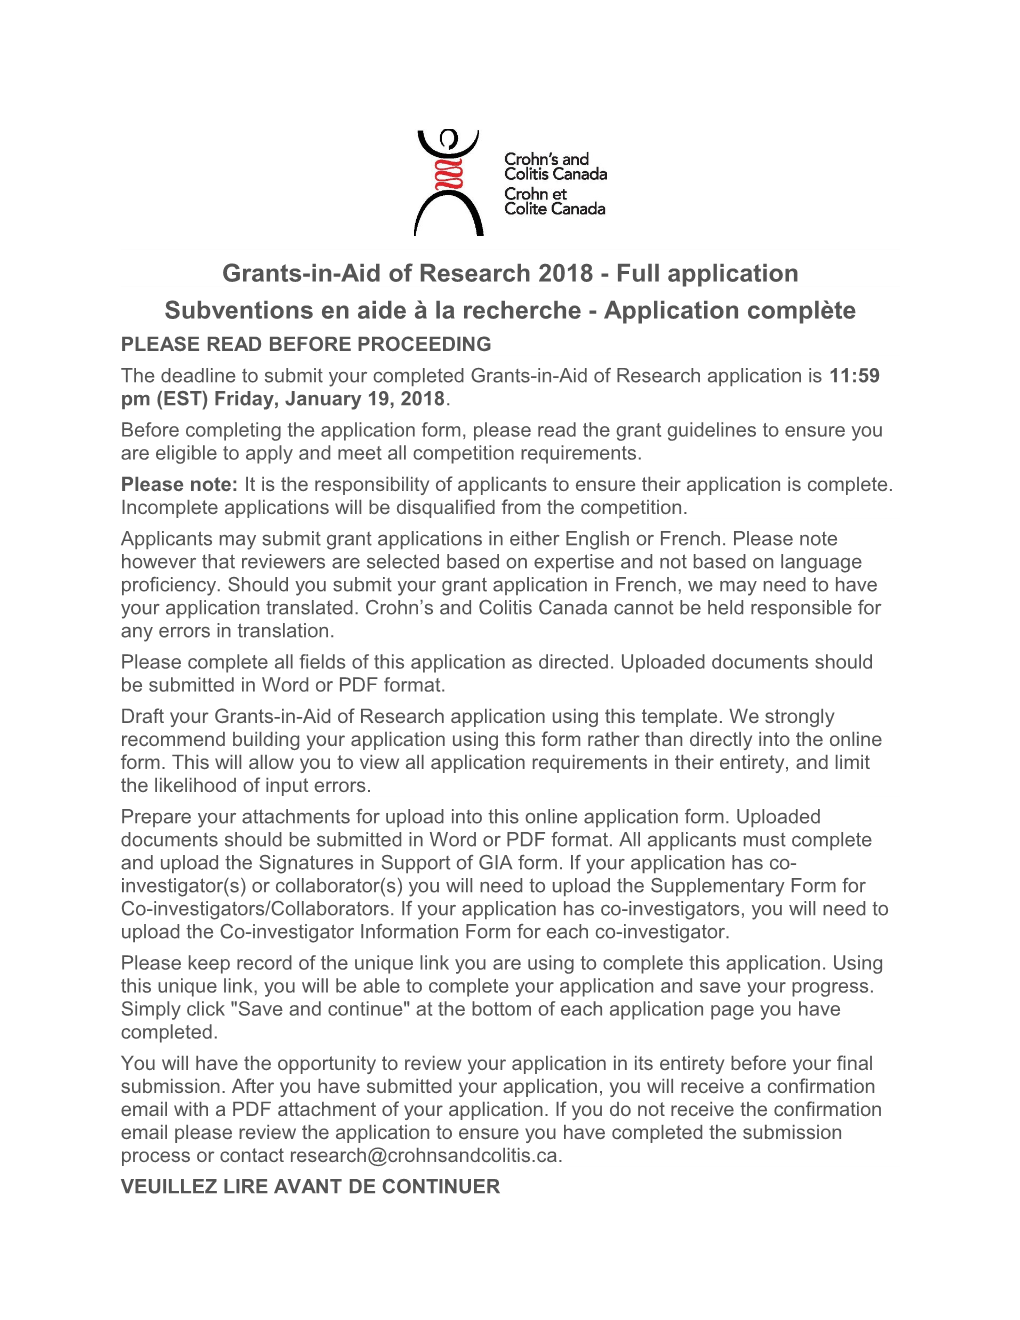 Grants-In-Aid of Research 2018 - Full Application